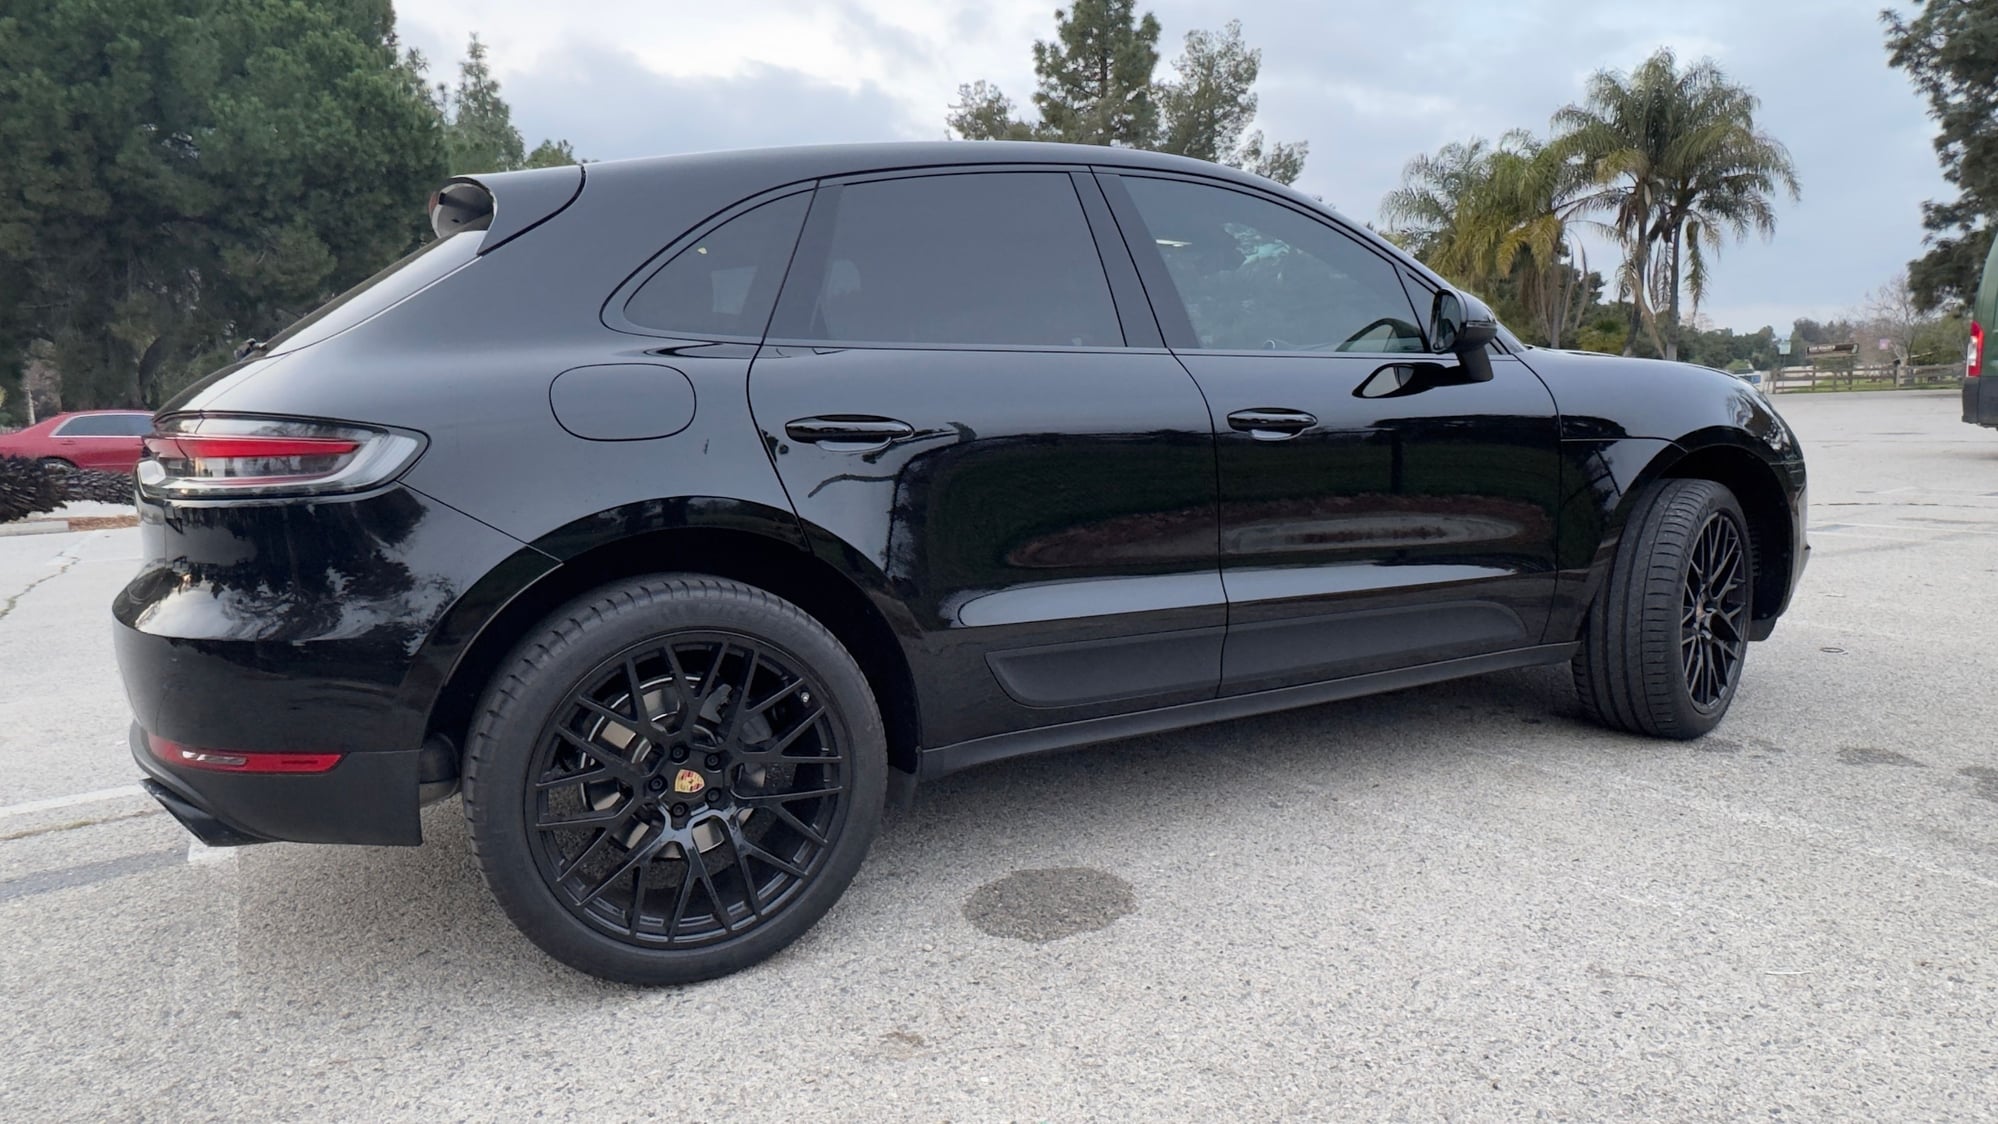 2019 Porsche Macan - 2019 Macan S CPO - Used - VIN Mint 2019 Macan S - 20,300 Miles - 6 cyl - 4WD - Automatic - SUV - Black - Los Angeles, CA 91436, United States